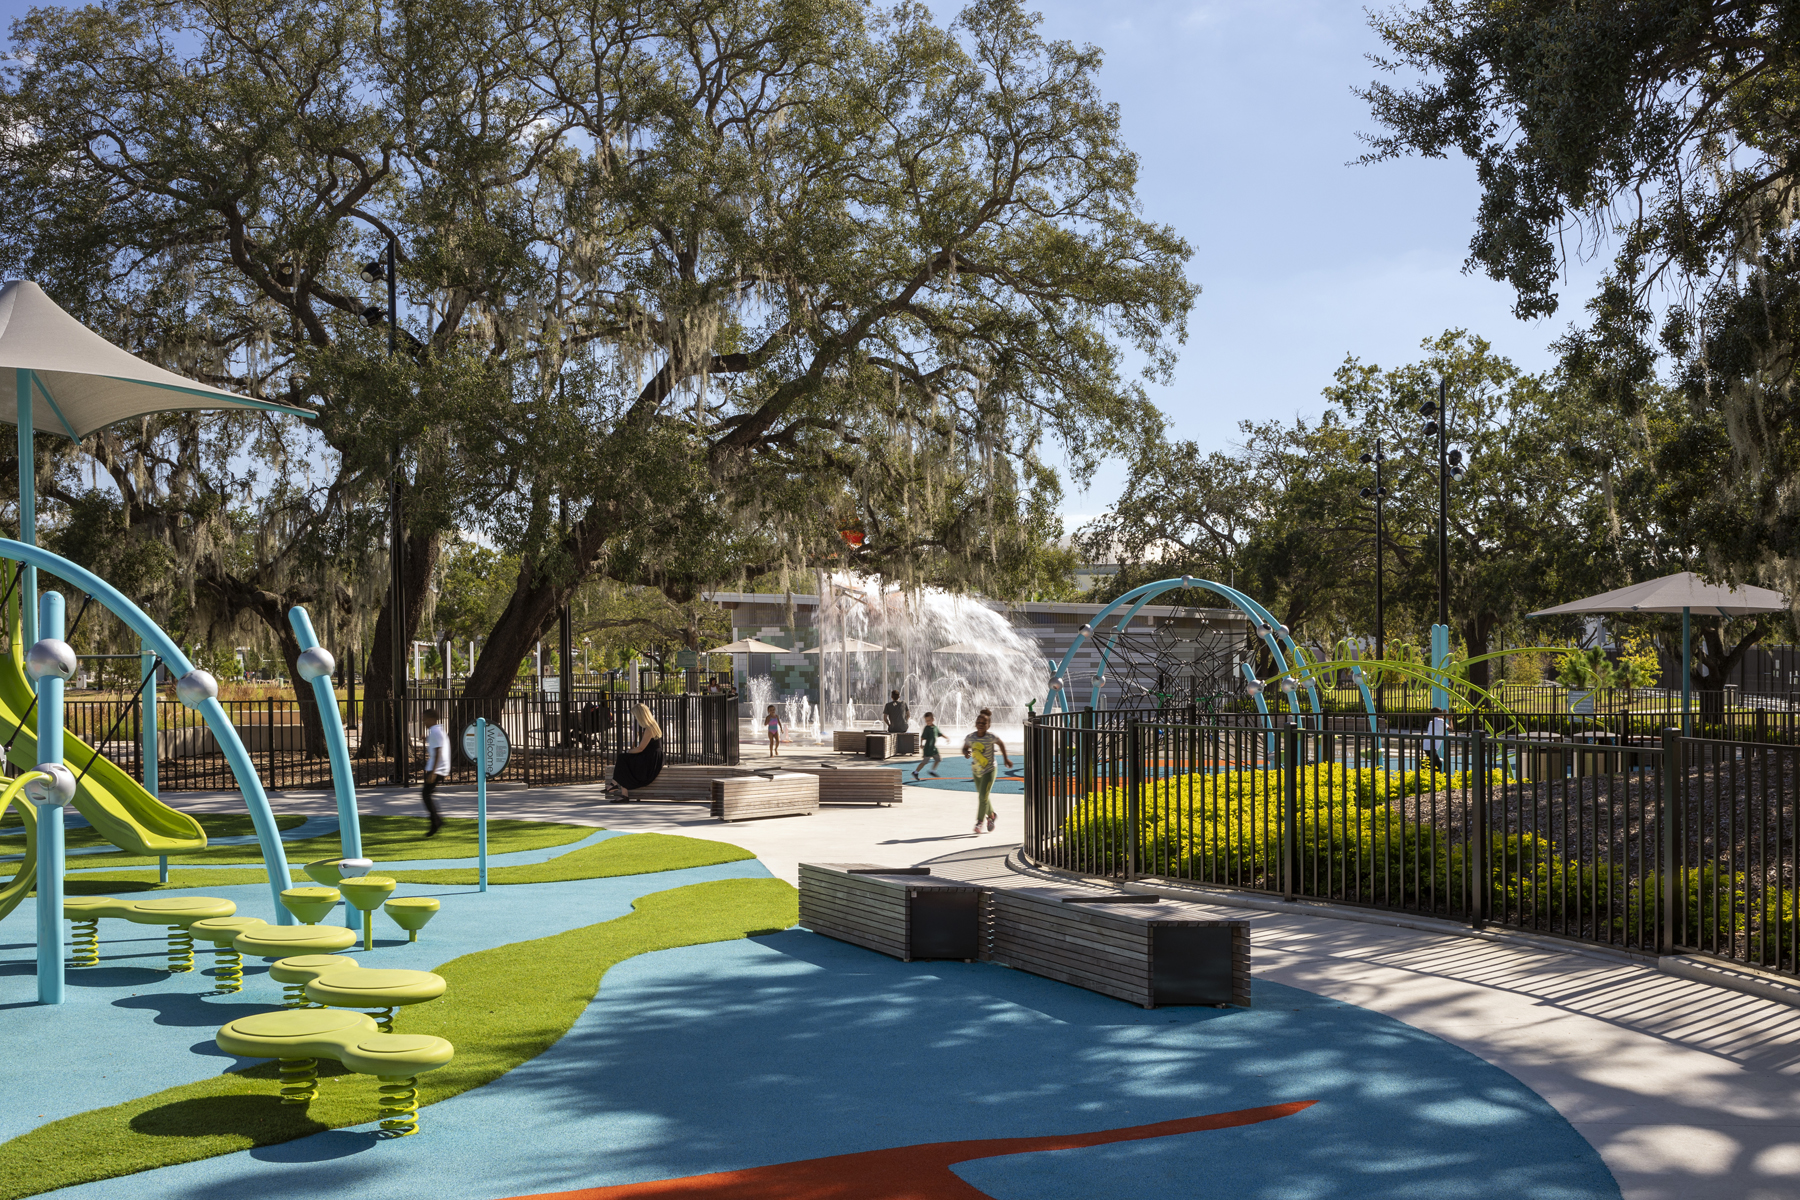 A children’s play area with splash pad, local art, native plantings and plenty of seating invite engagement with Civitas’ award-winning Julian B. Lane Riverfront Park.